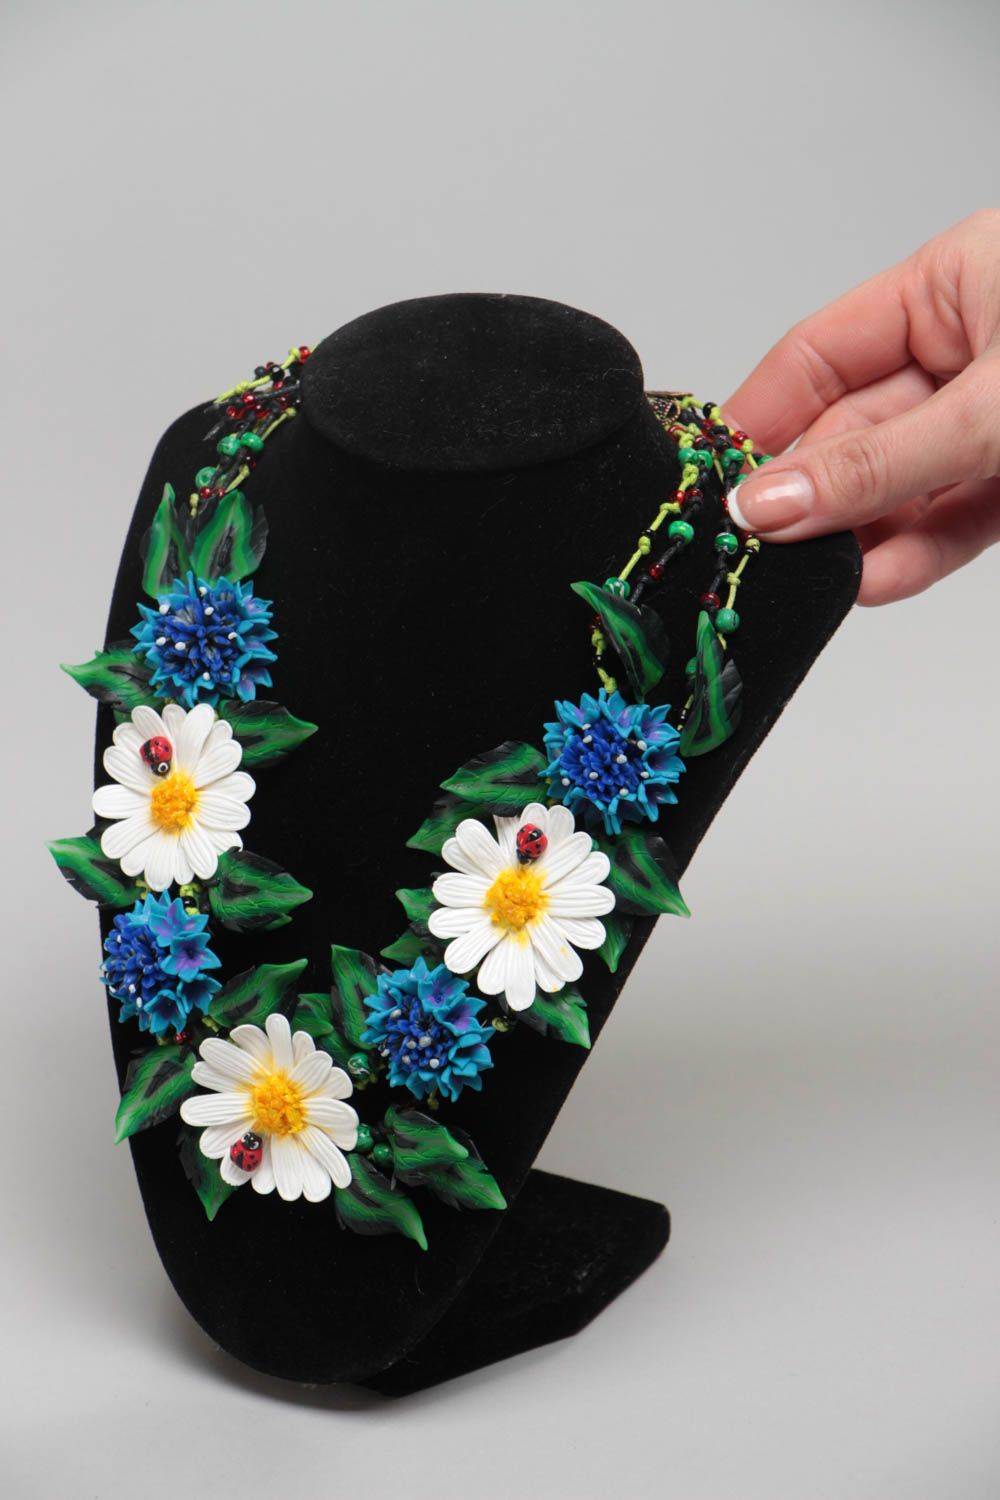 Necklace made of polymer clay with wildflowers cornflowers and daisies hand made photo 5